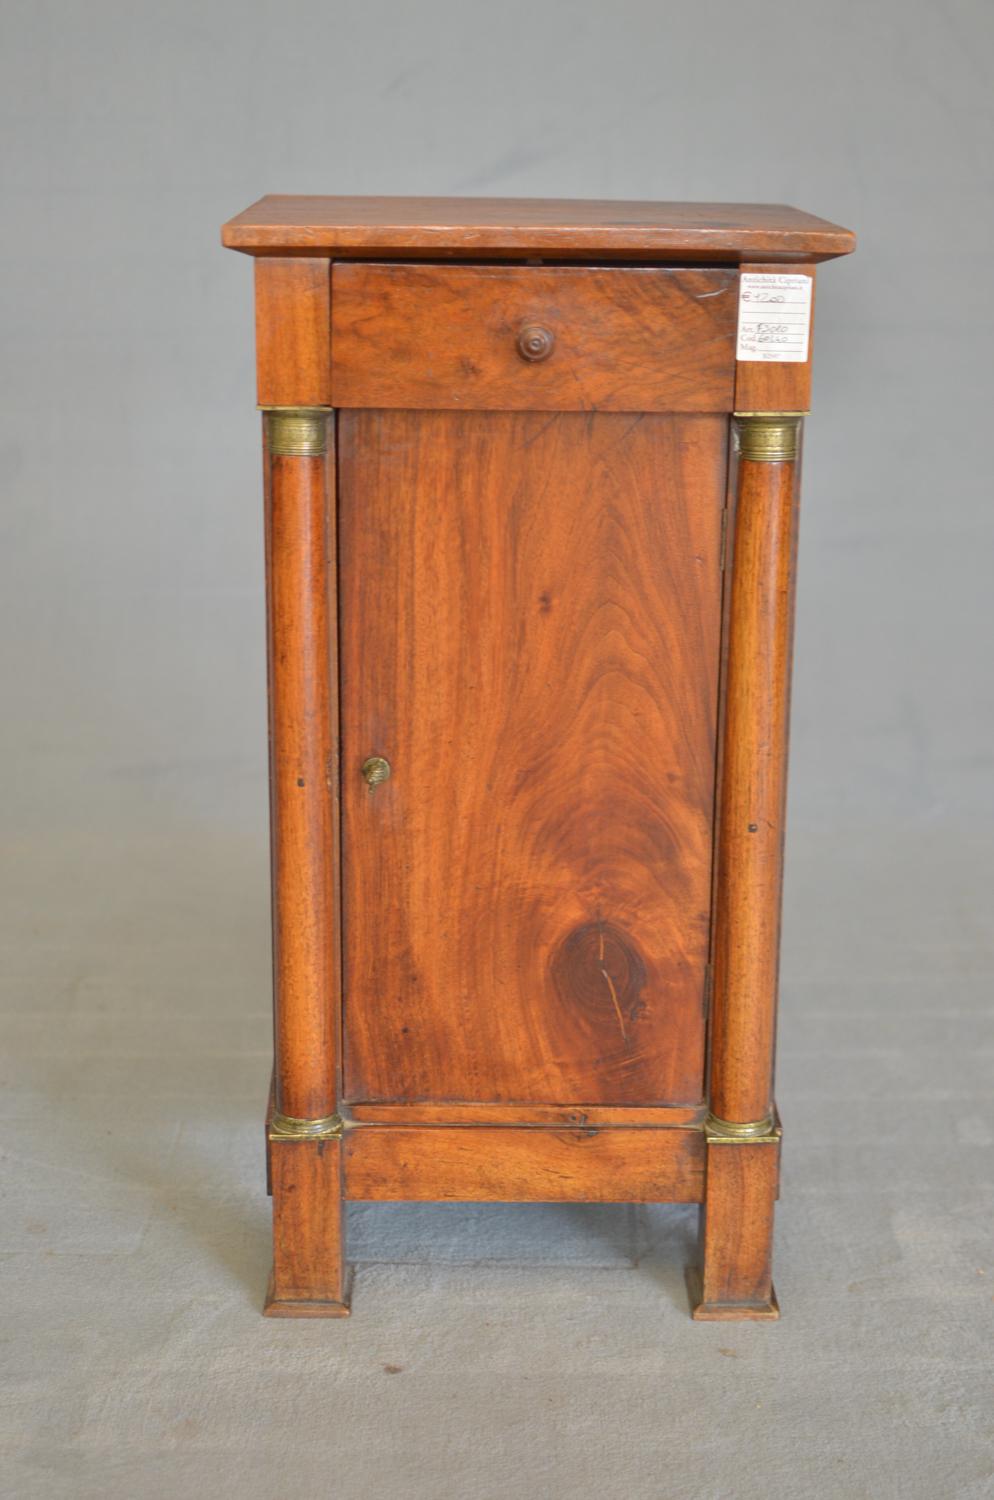 Empire bedside table in light walnut of French origin from 1840. The bedside table has an upper drawer and lower door. All the bronzes of the columns and the particular handle of the door are present.